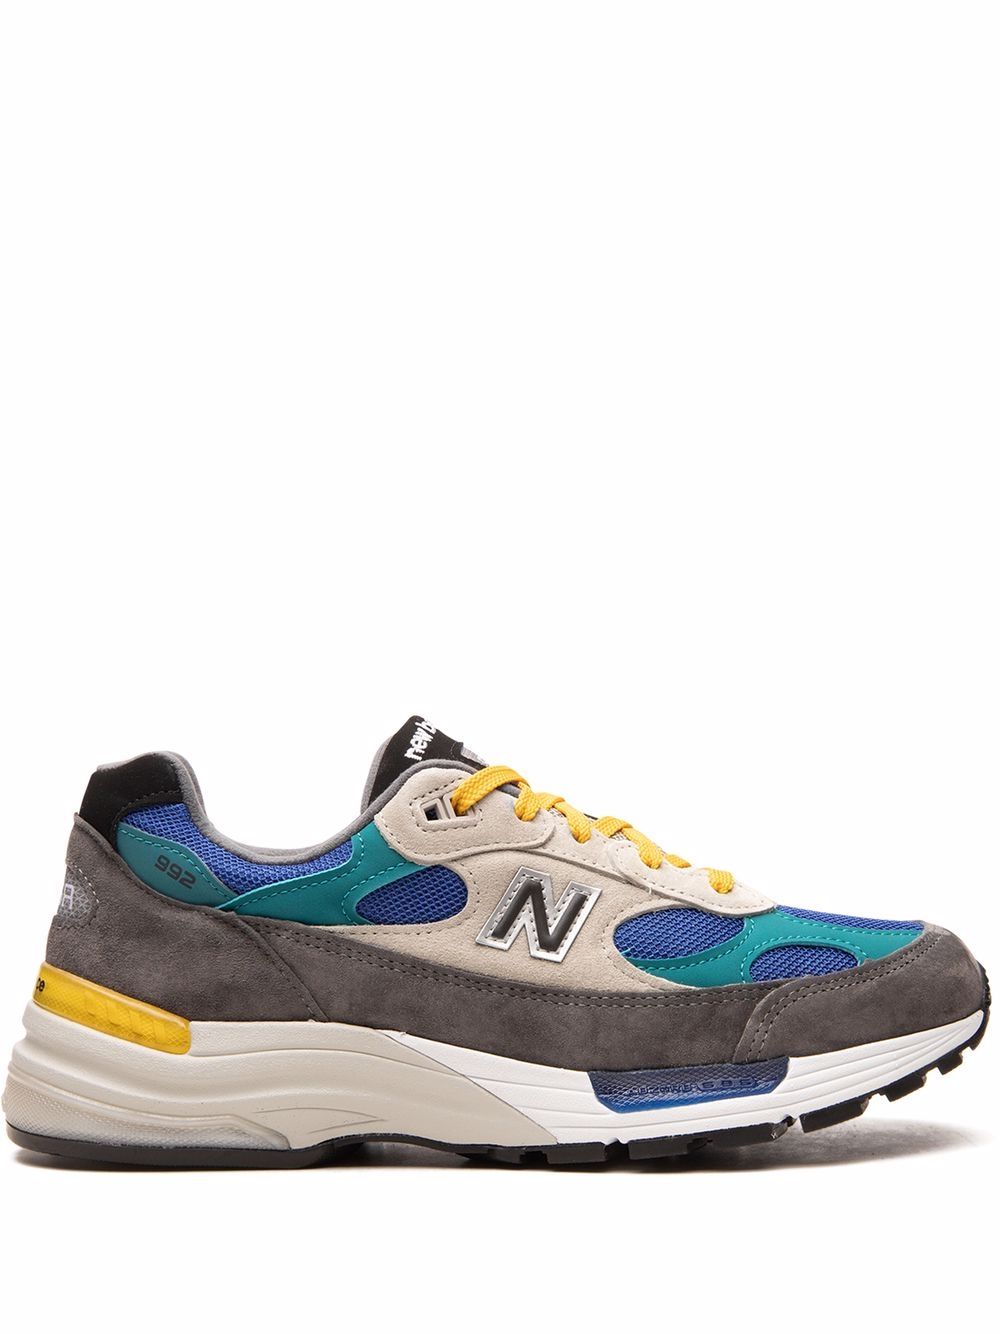 New Balance M992RR low-top sneakers - Grey